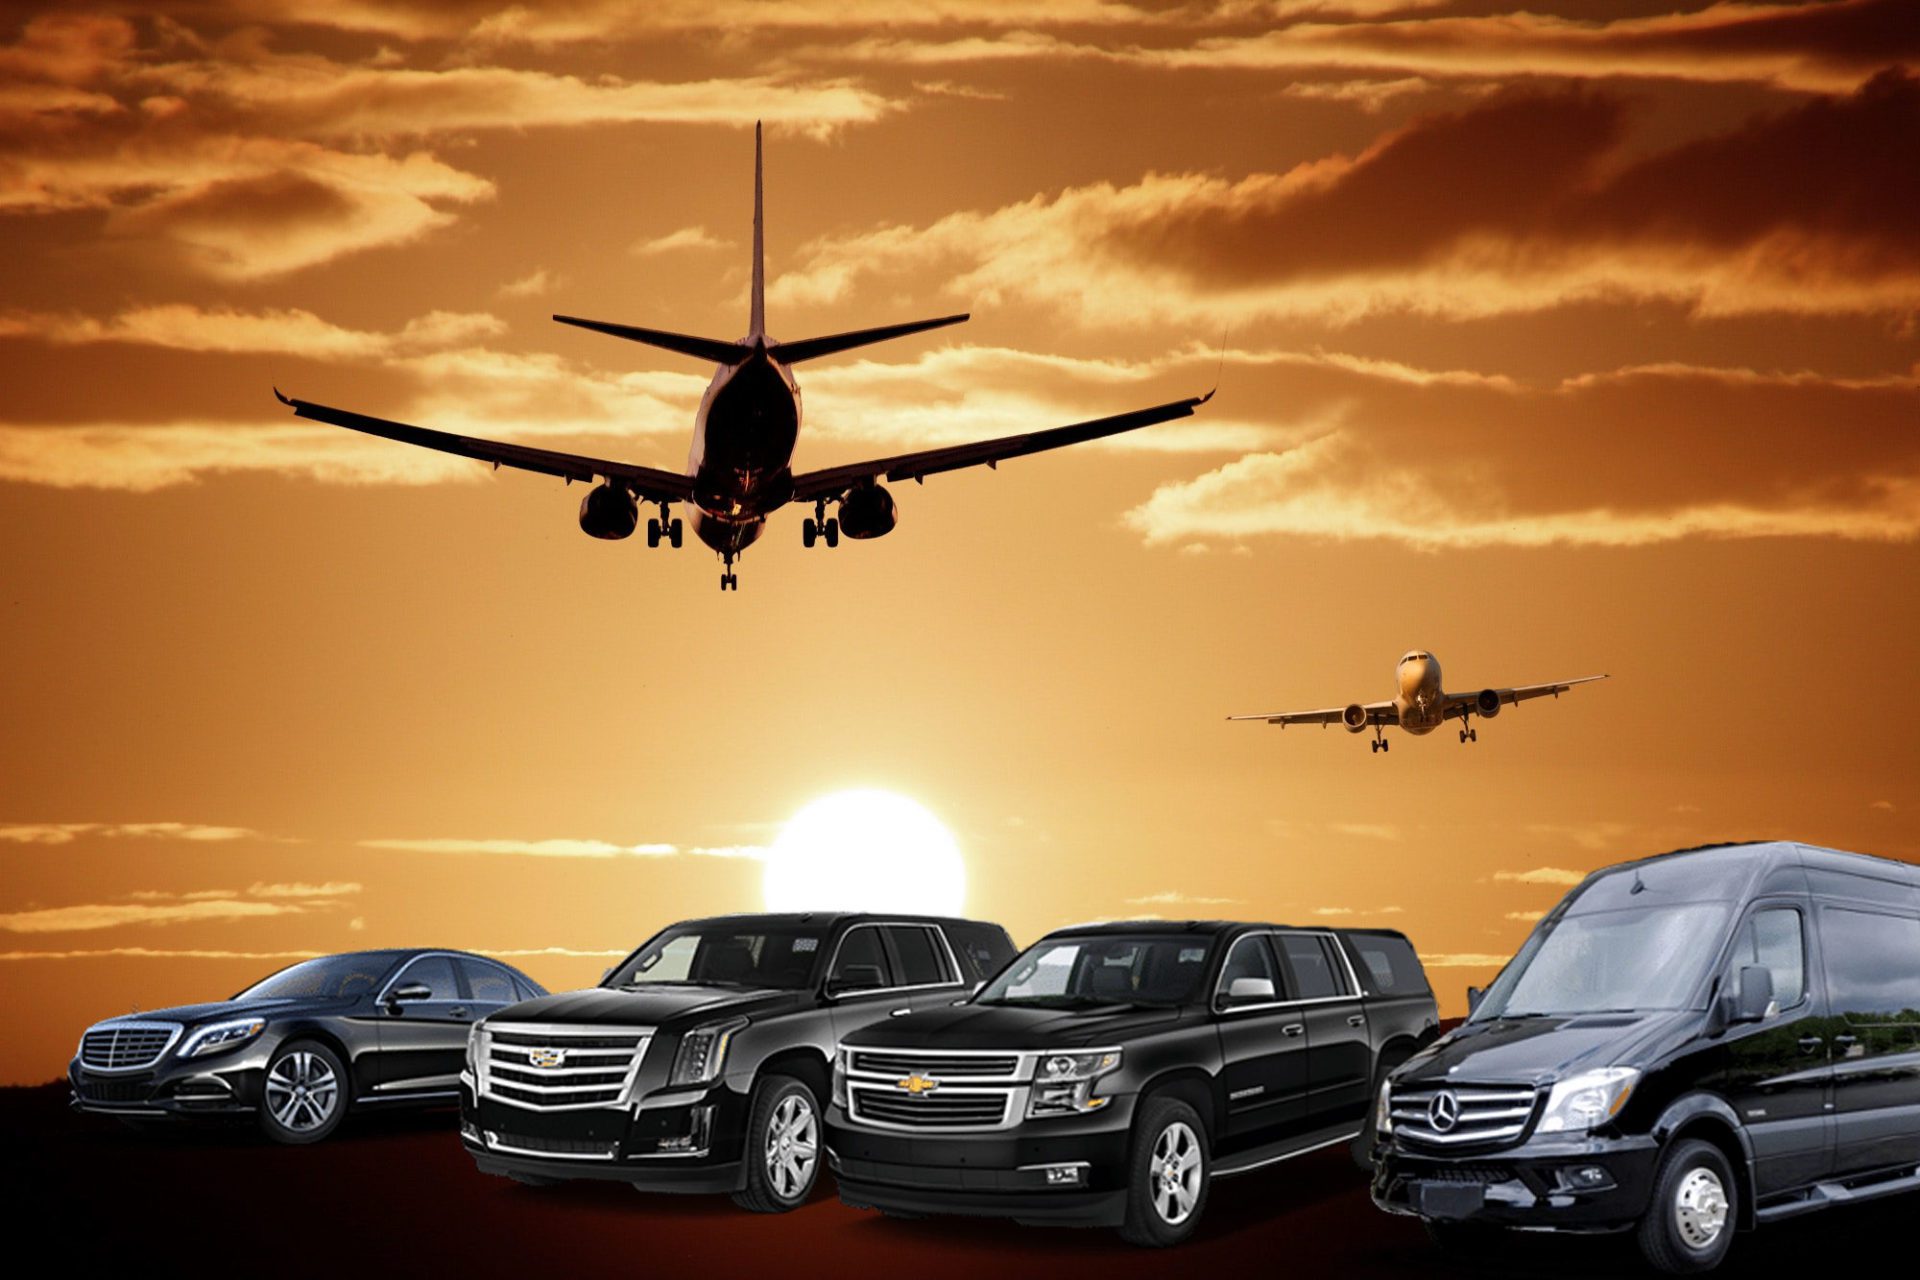 Jacksonville airport black car service - jet and vehicles